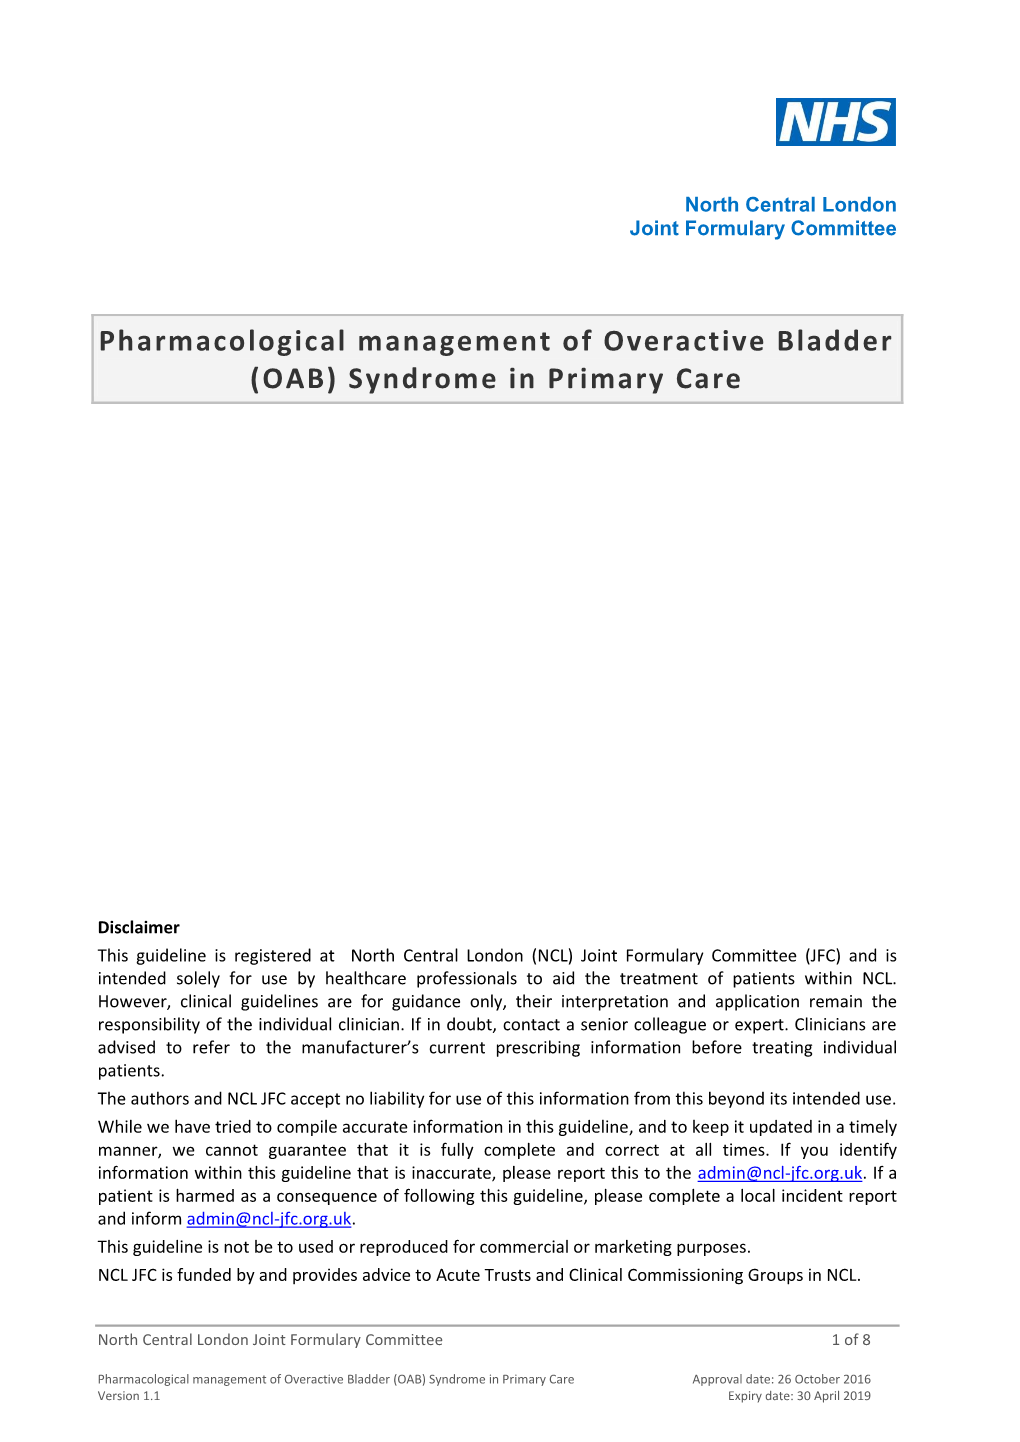 Pharmacological Management of Overactive Bladder (OAB) Syndrome in Primary Care